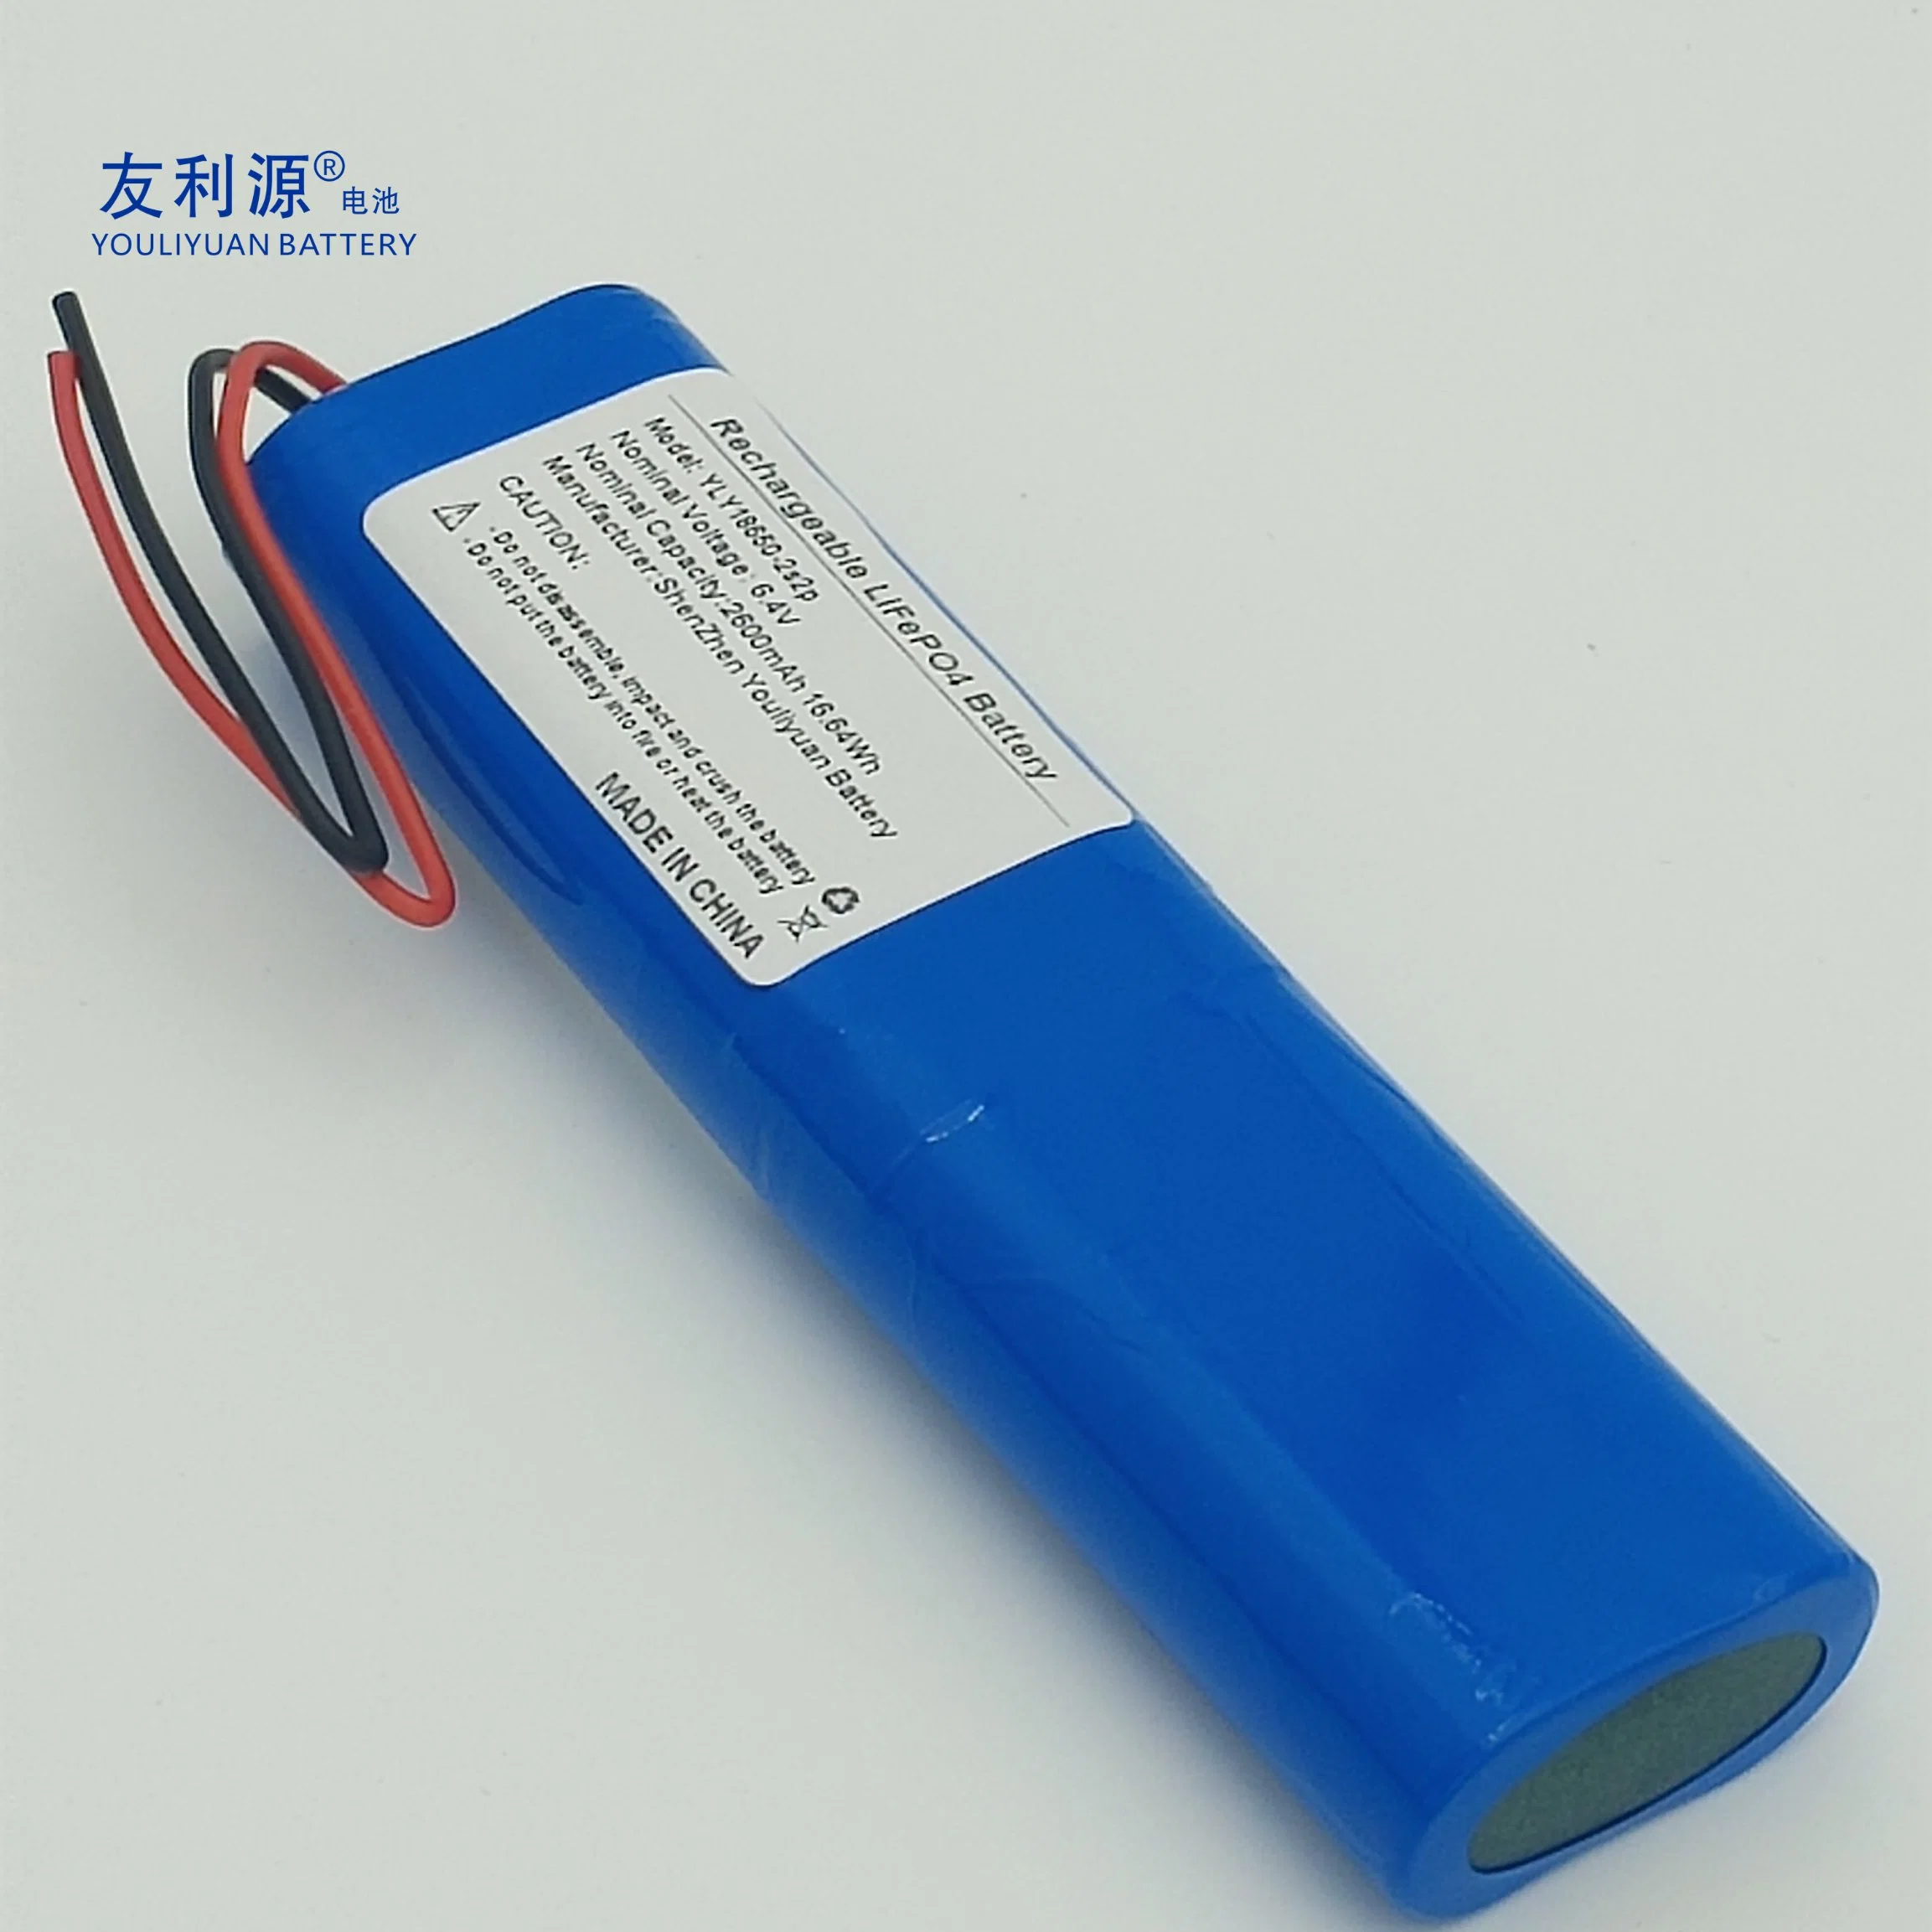 18650 Cell 2s2p 6.4V 2600mAh LiFePO4 Battery with BMS for Lamp Walkie-Talkie Cordless Tools